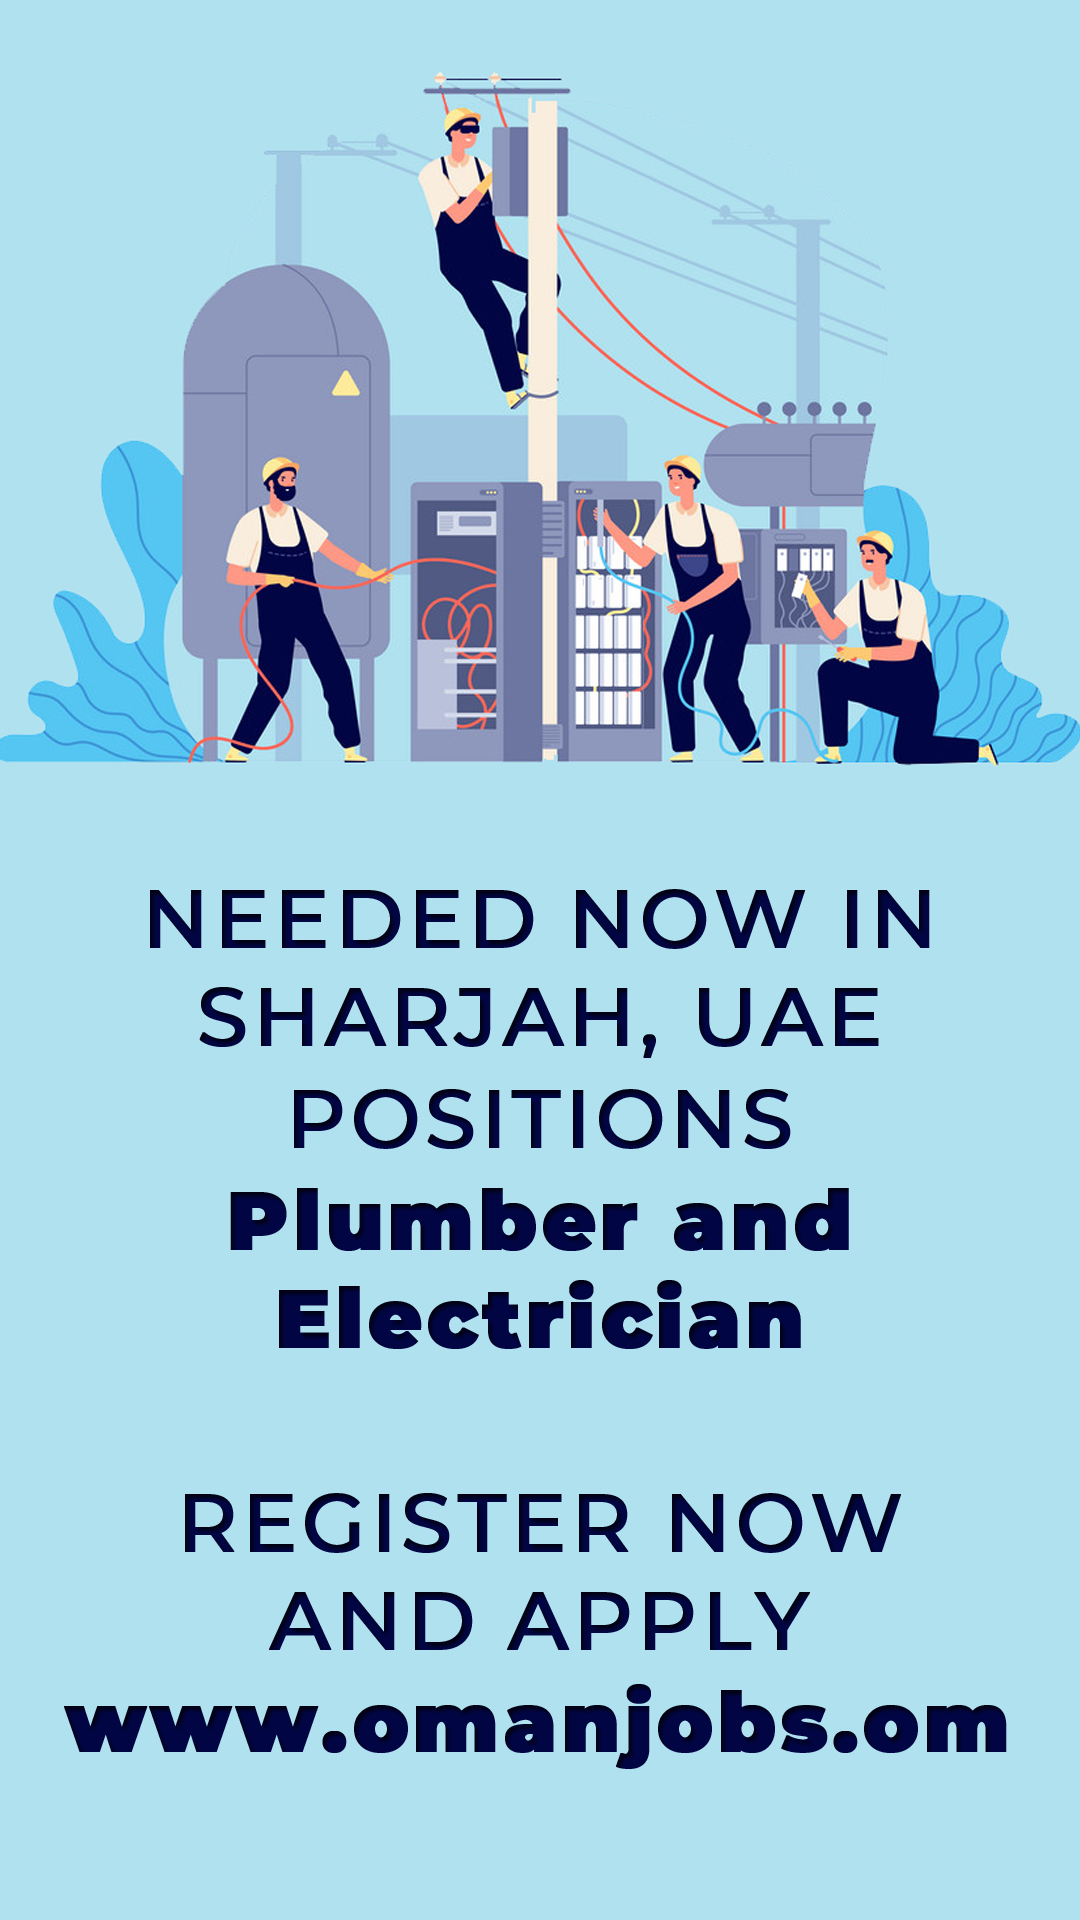 Hiring Plumber and Electrician